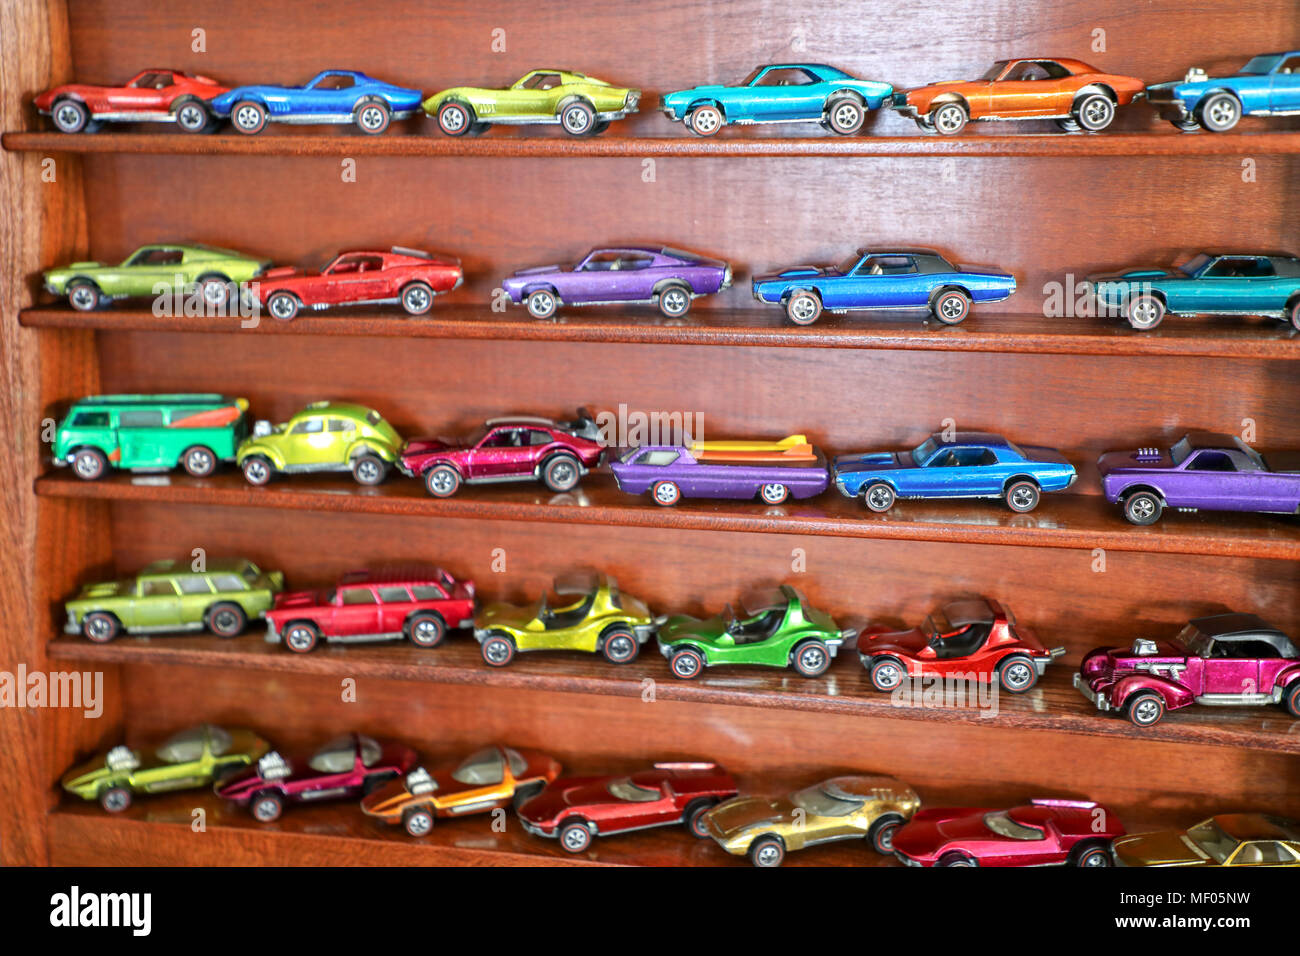 Multi Colored Redline Hot Wheels In A Cherry Display Case Stock Photo Alamy